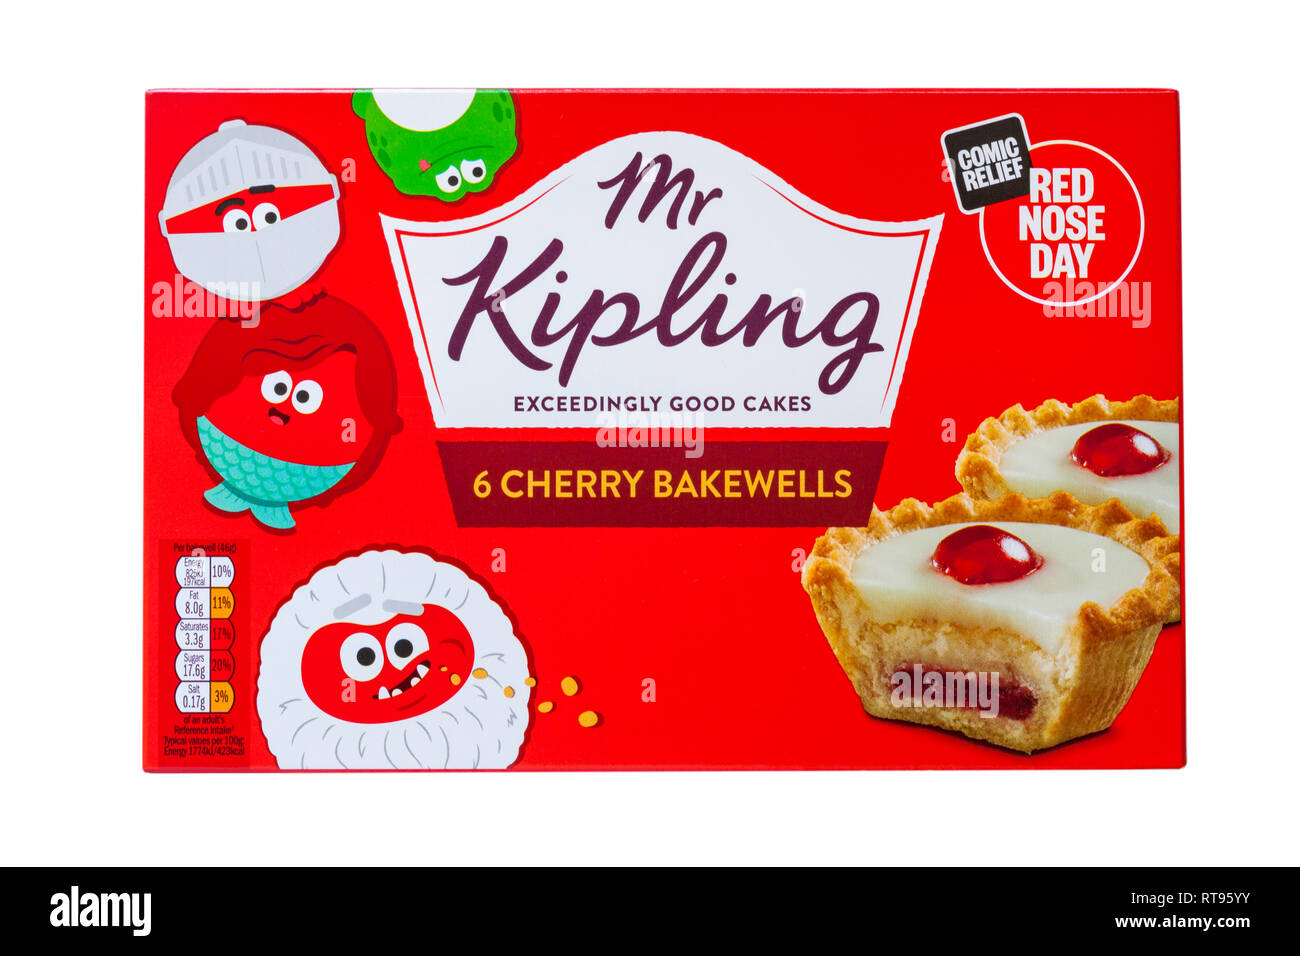 Box of Mr Kipling 6 cherry bakewells exceedingly good cakes isolated on  white background for comic relief red nose day Stock Photo - Alamy